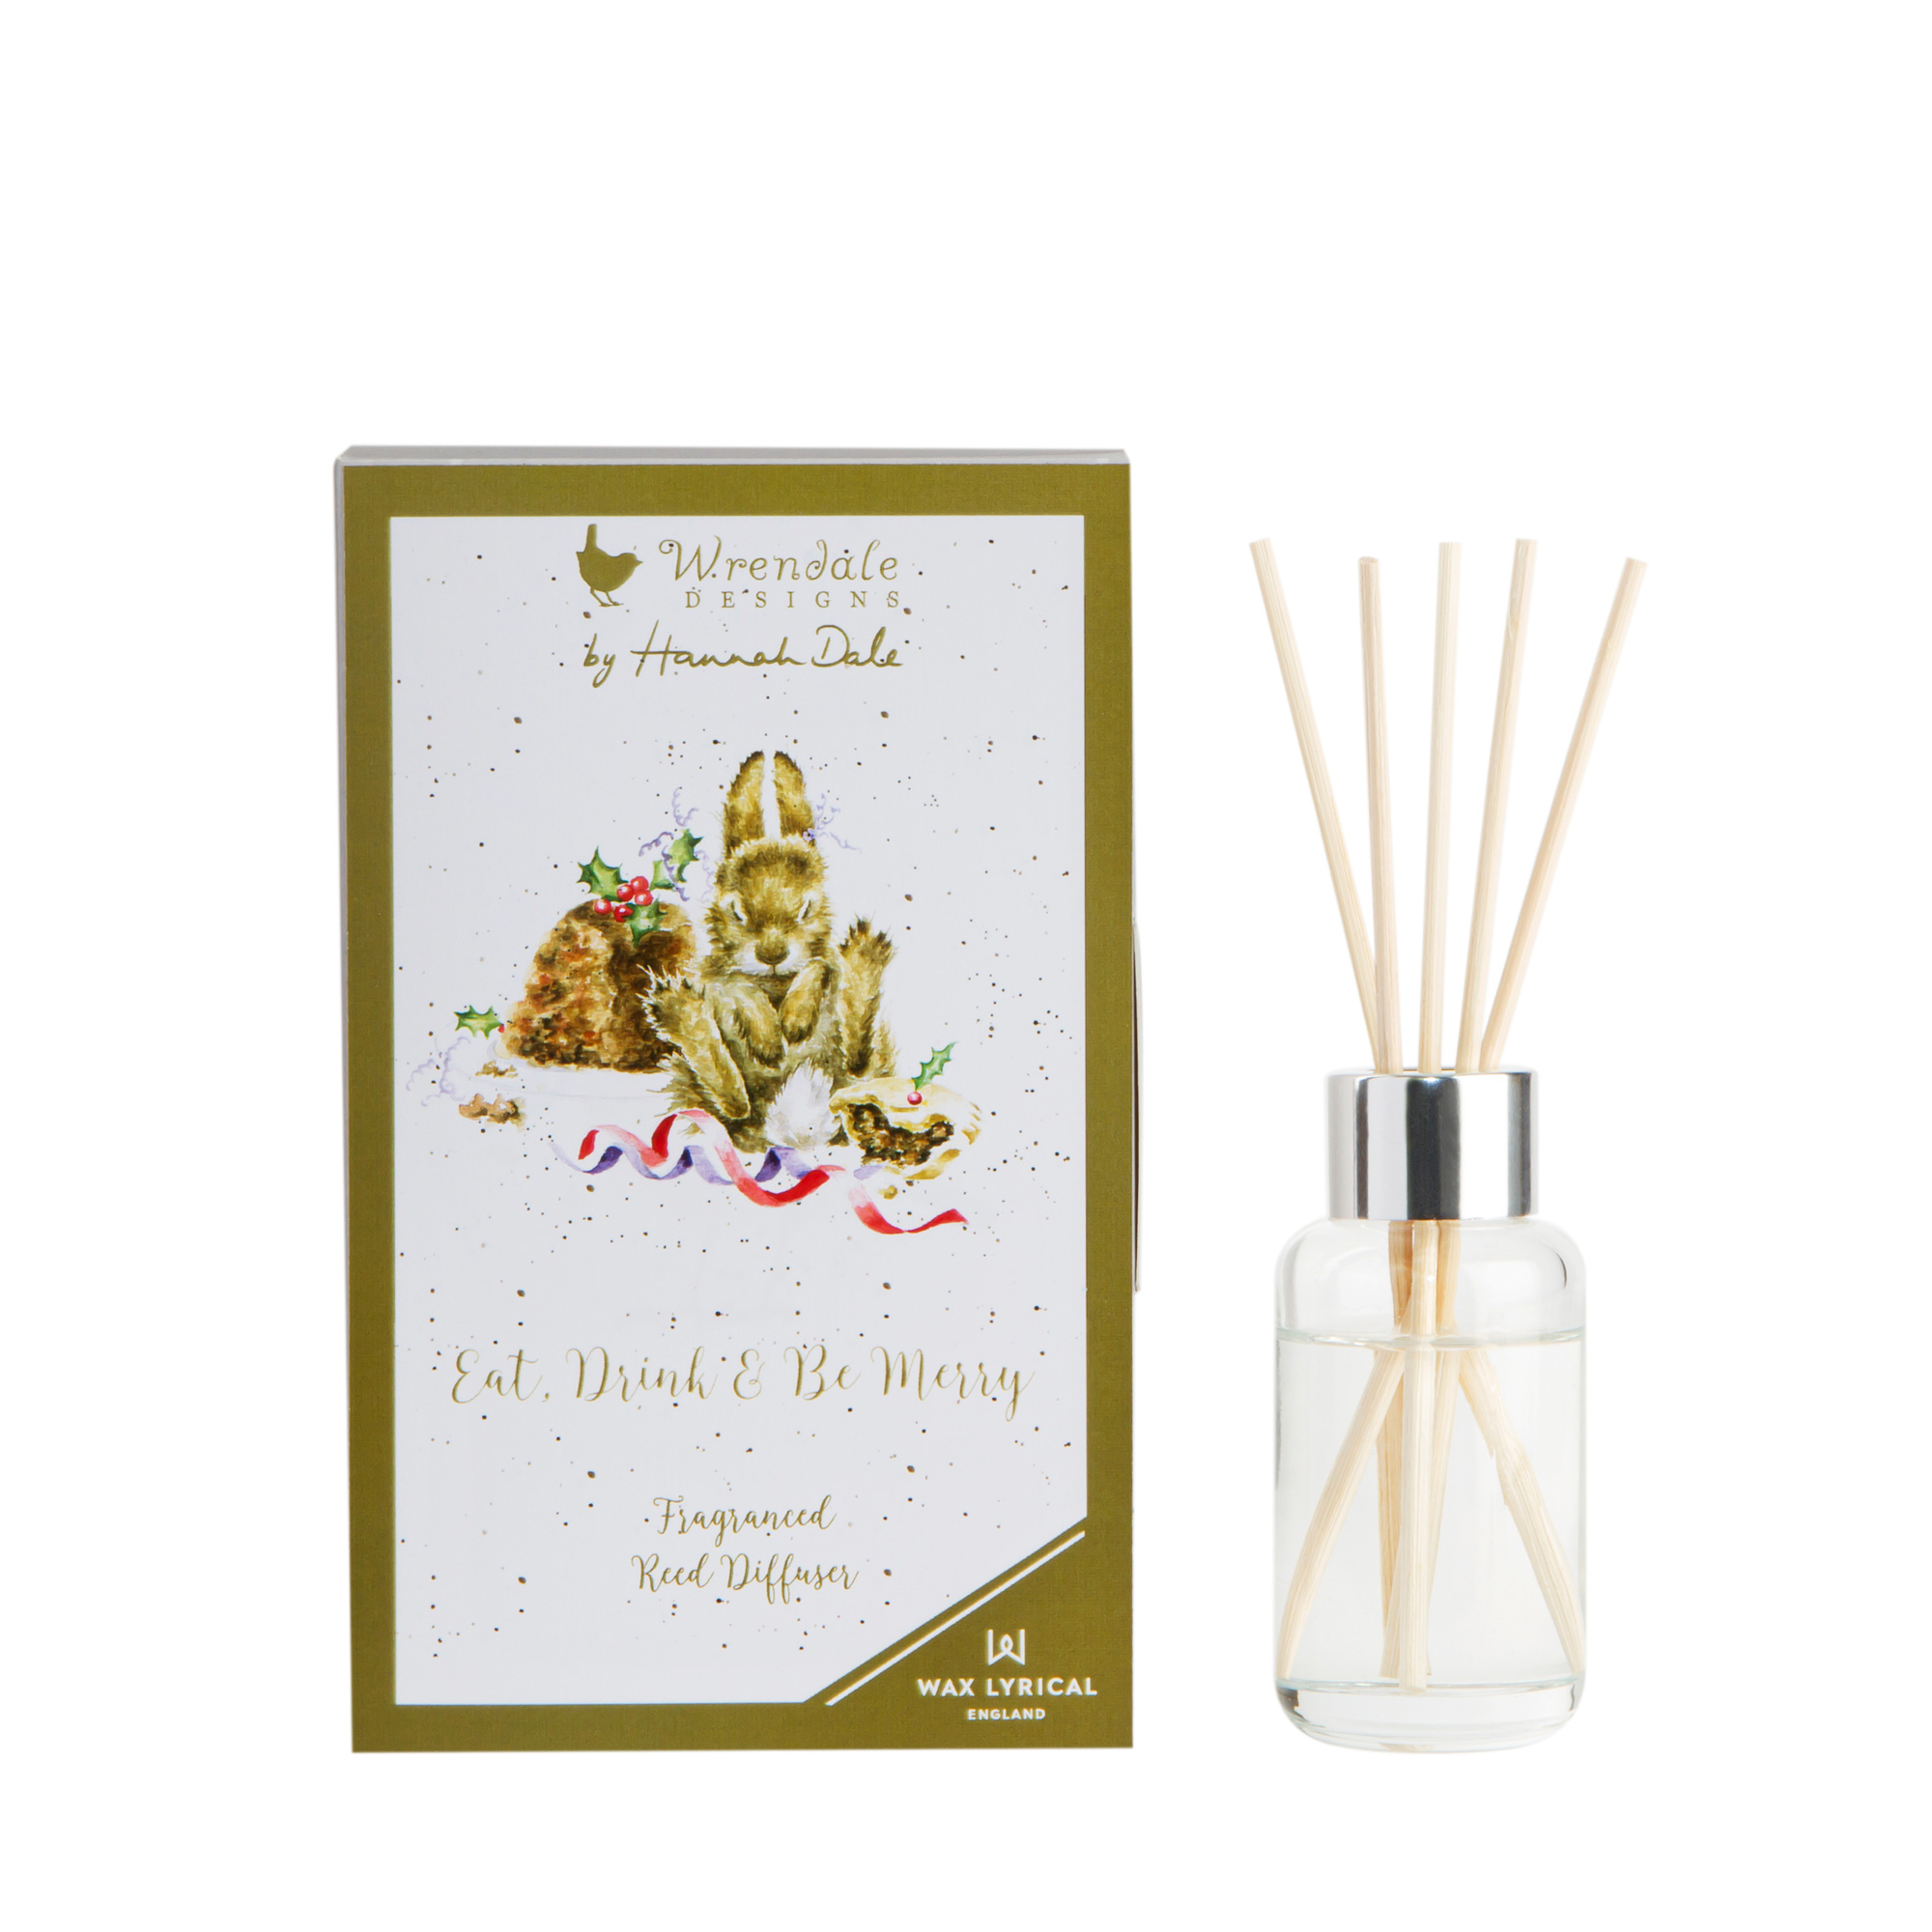 Eat. Drink & Be Merry 40ml Reed Diffuser Gift Box image number null